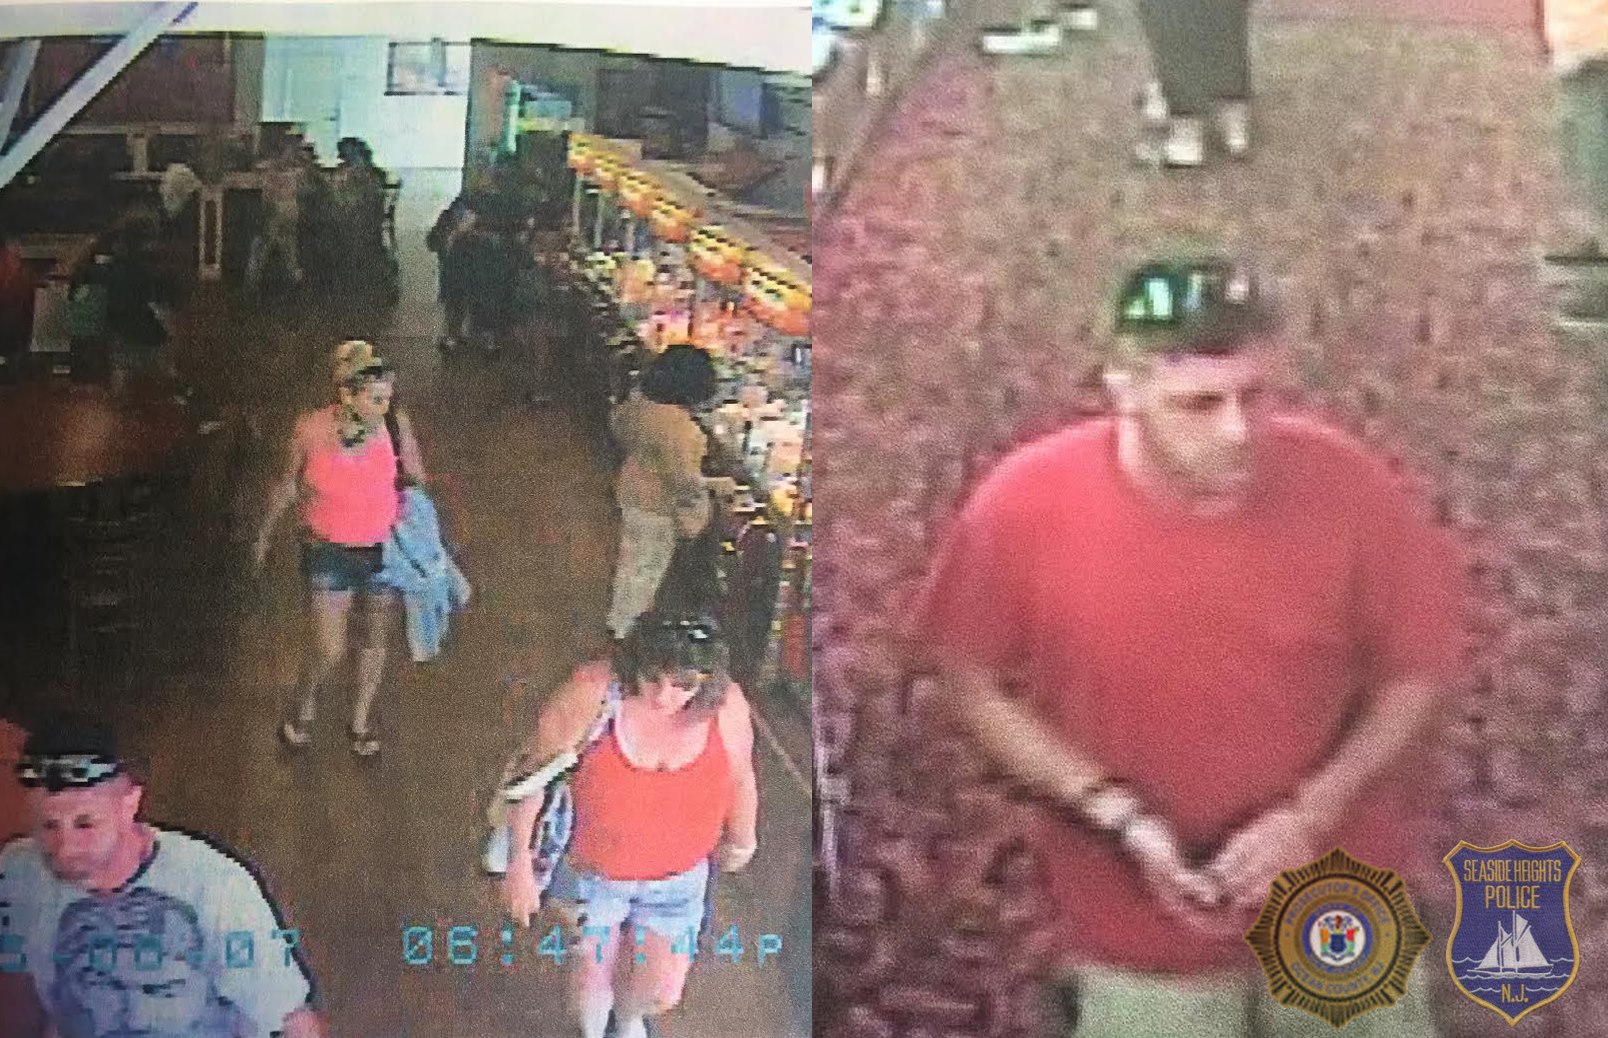 Suspects in a burglary in Seaside Heights. (Click to Expand) (Photo: Ocean County Prosecutor's Office)